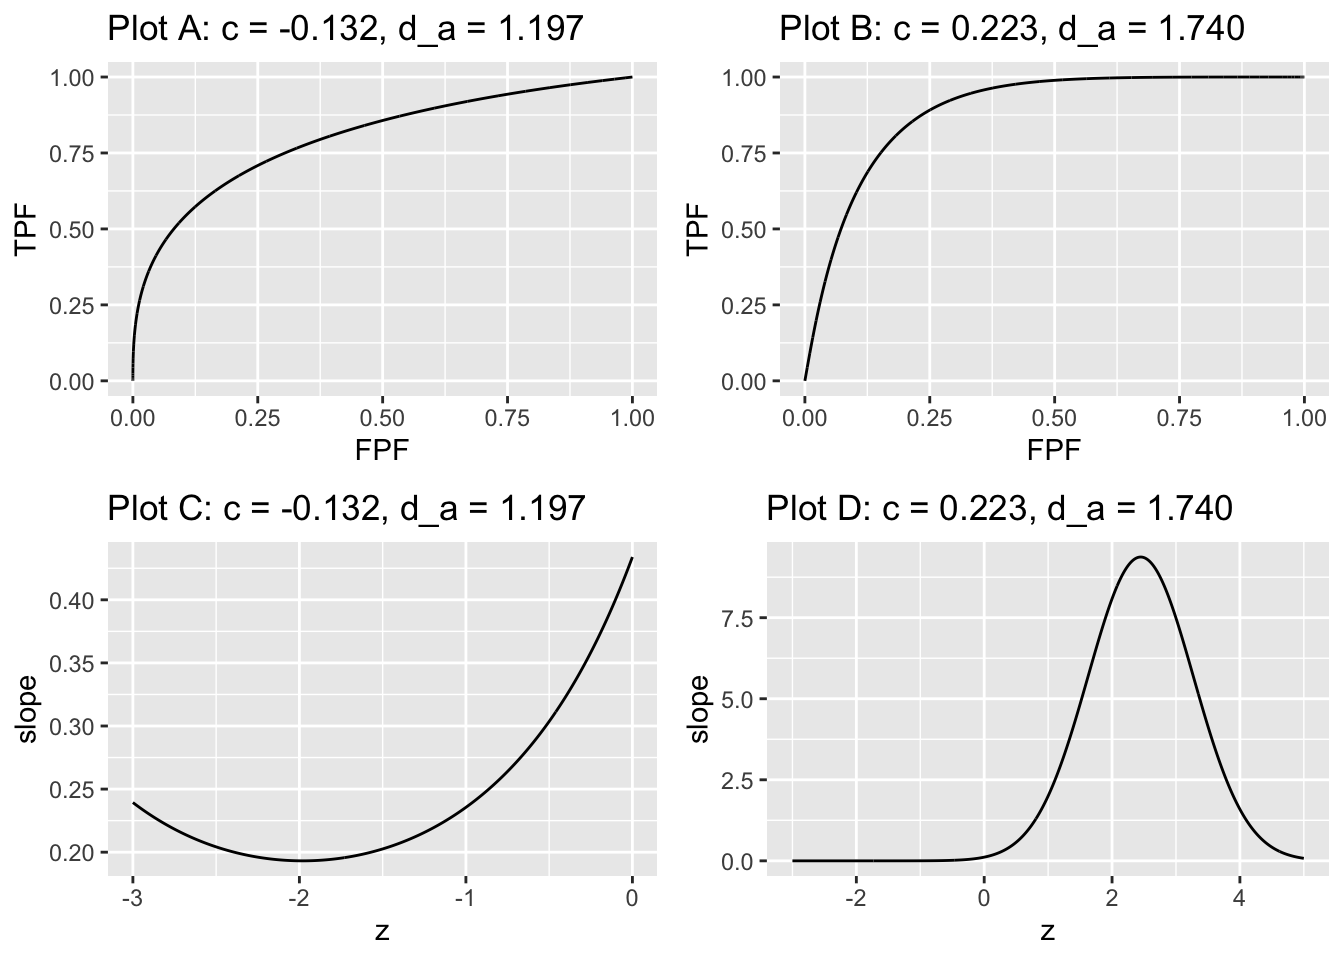 The plots are labeled by the values of $c$ and $d_a$. Plots A and B are proper ROC plots while plots C and D are the corresponding slope plots. In plot A the slope is infinite near the origin finite at the upper-right corner. In plot B the slope is finite near the origin and zero at the upper-right corner.